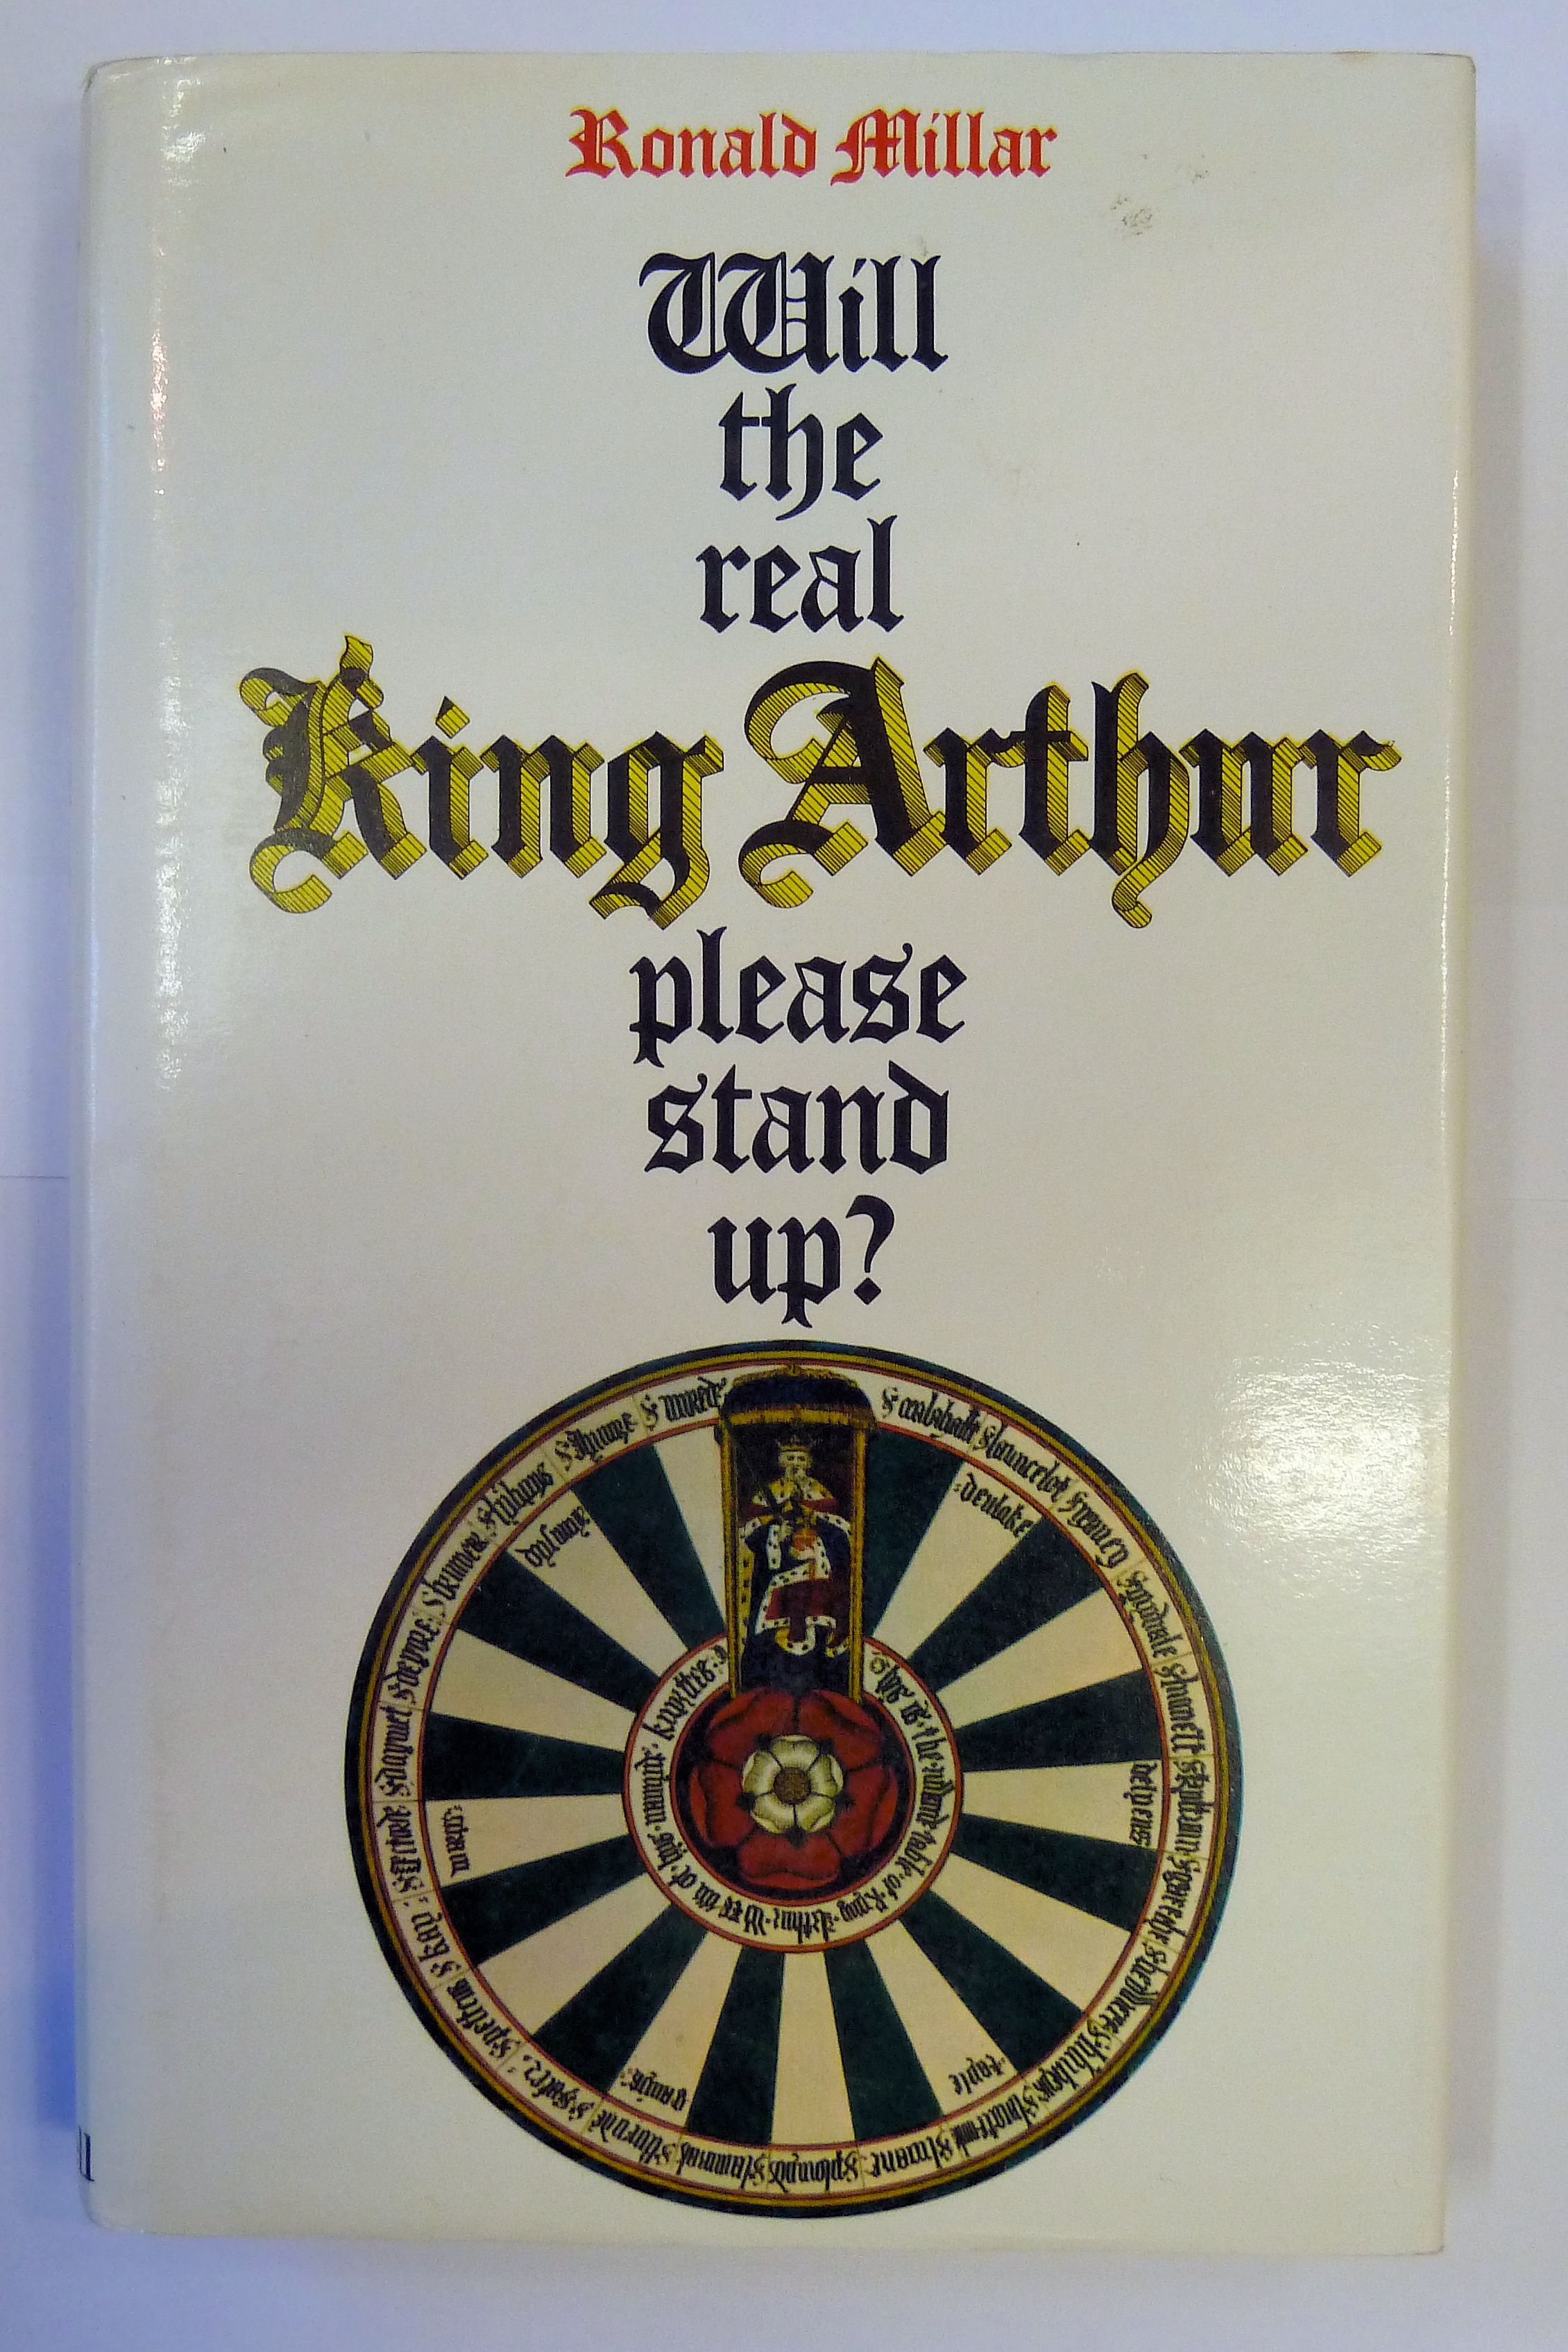 Will the real King Arthur please stand up?